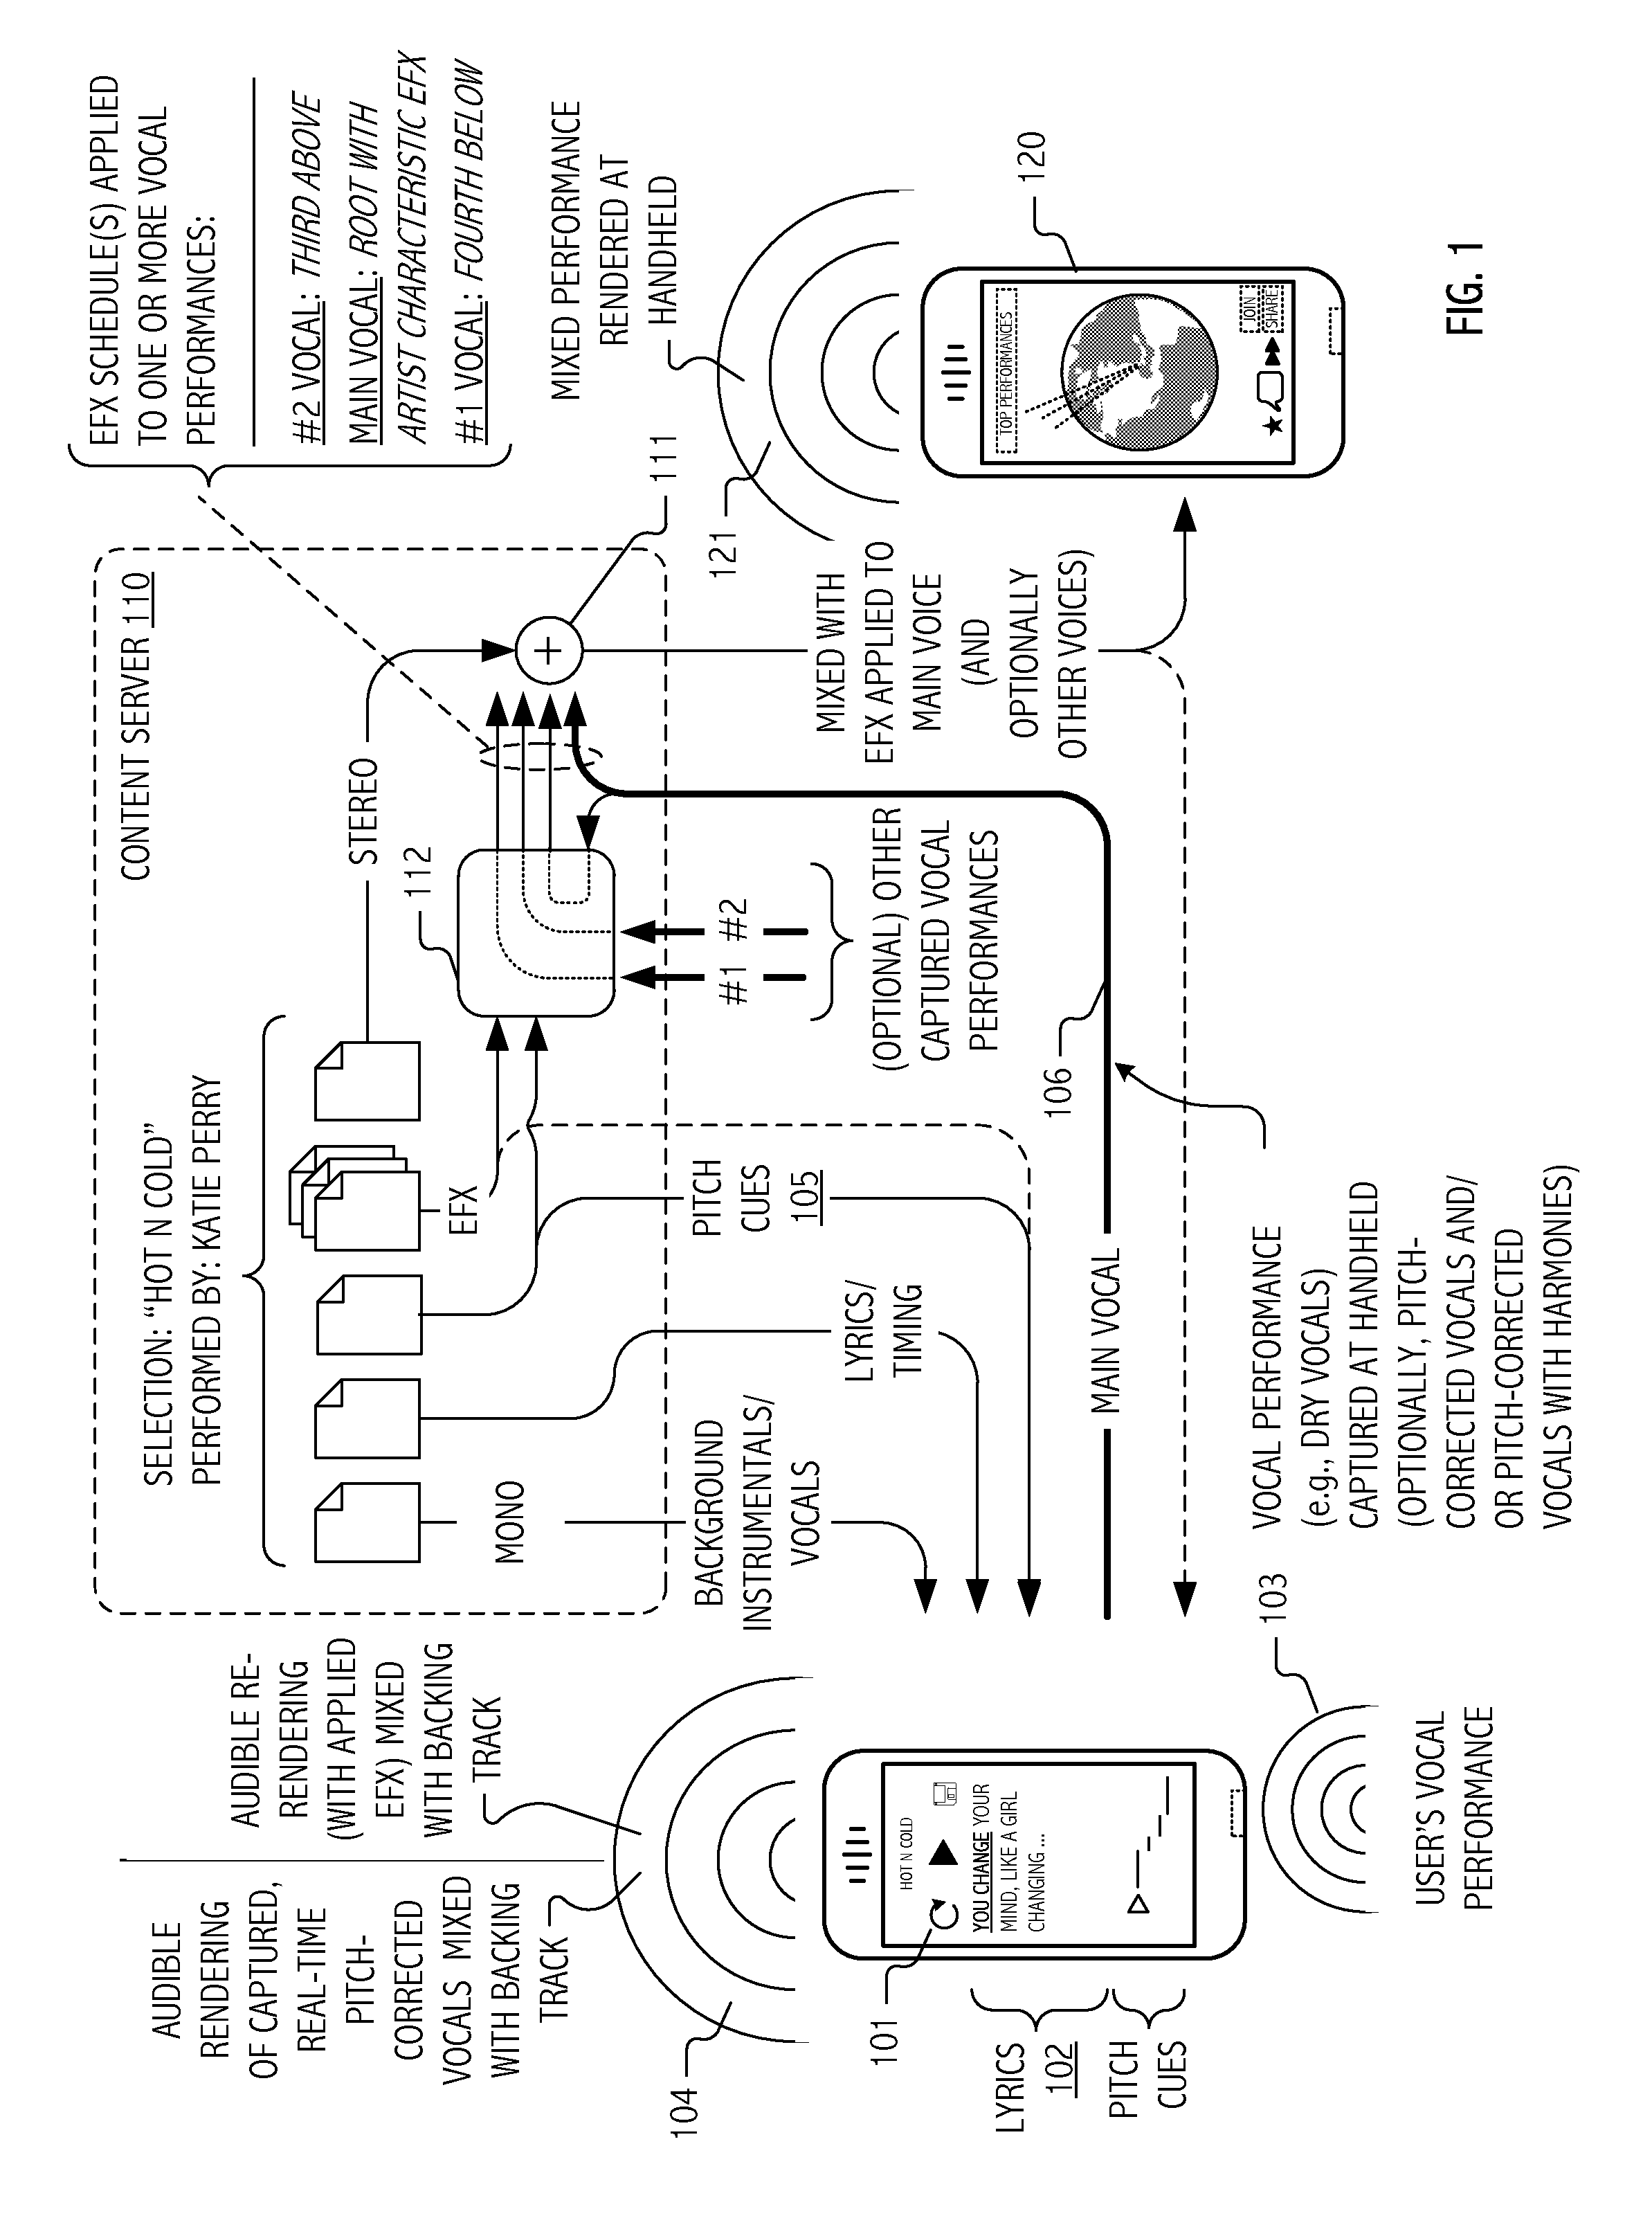 Social music system and method with continuous, real-time pitch correction of vocal performance and dry vocal capture for subsequent re-rendering based on selectively applicable vocal effect(s) schedule(s)